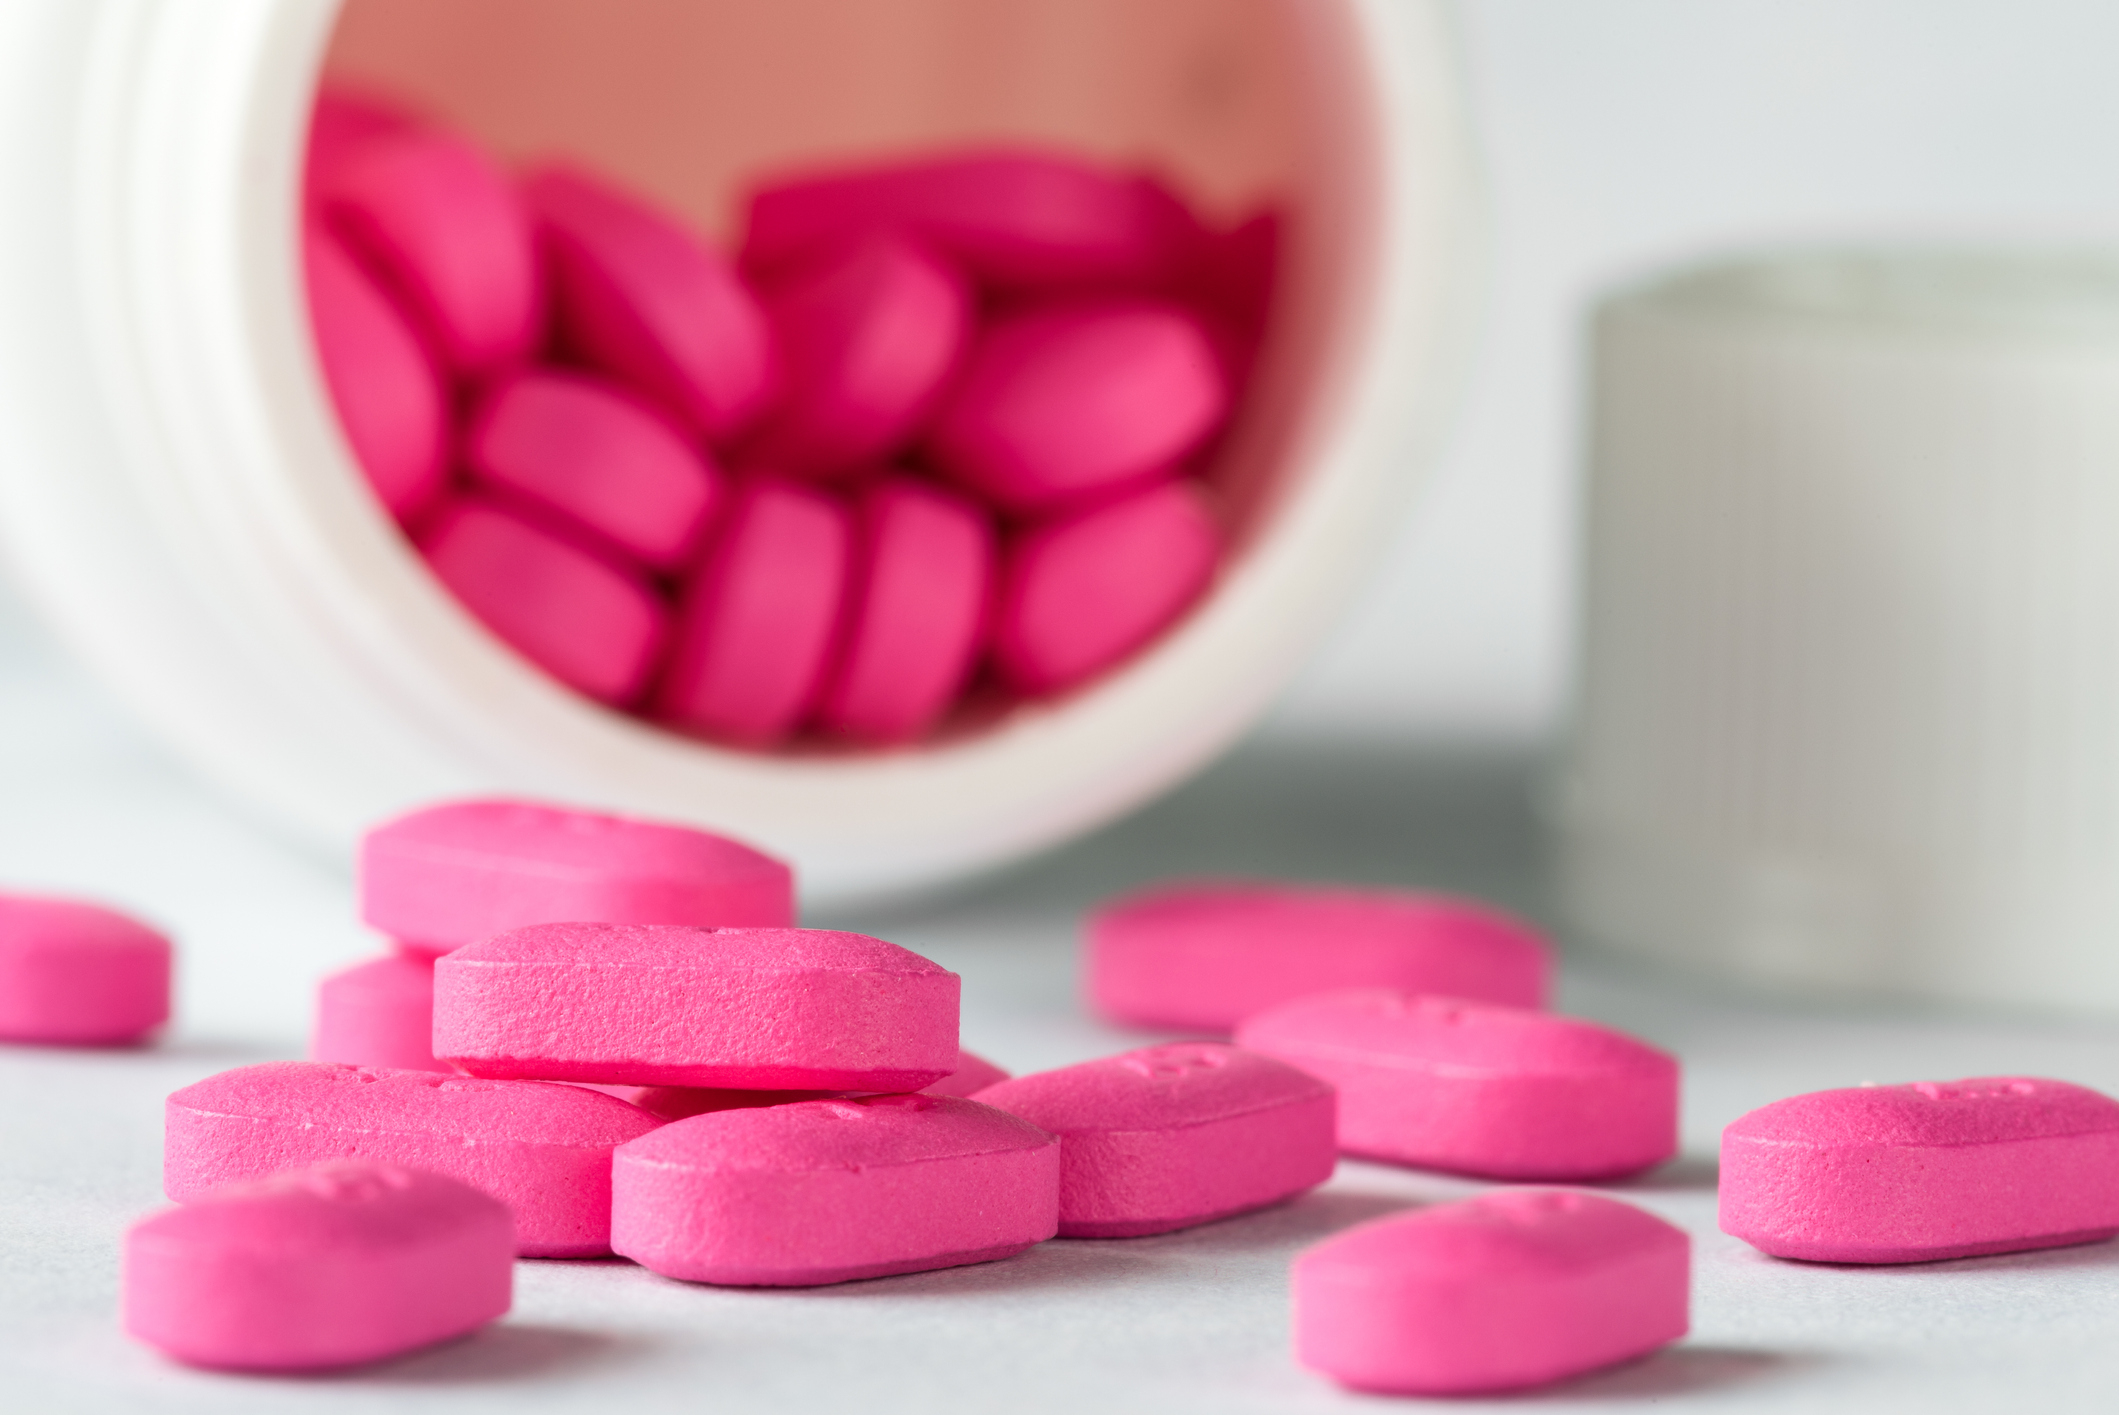 Close-up of pink tablets emerging from a bottle